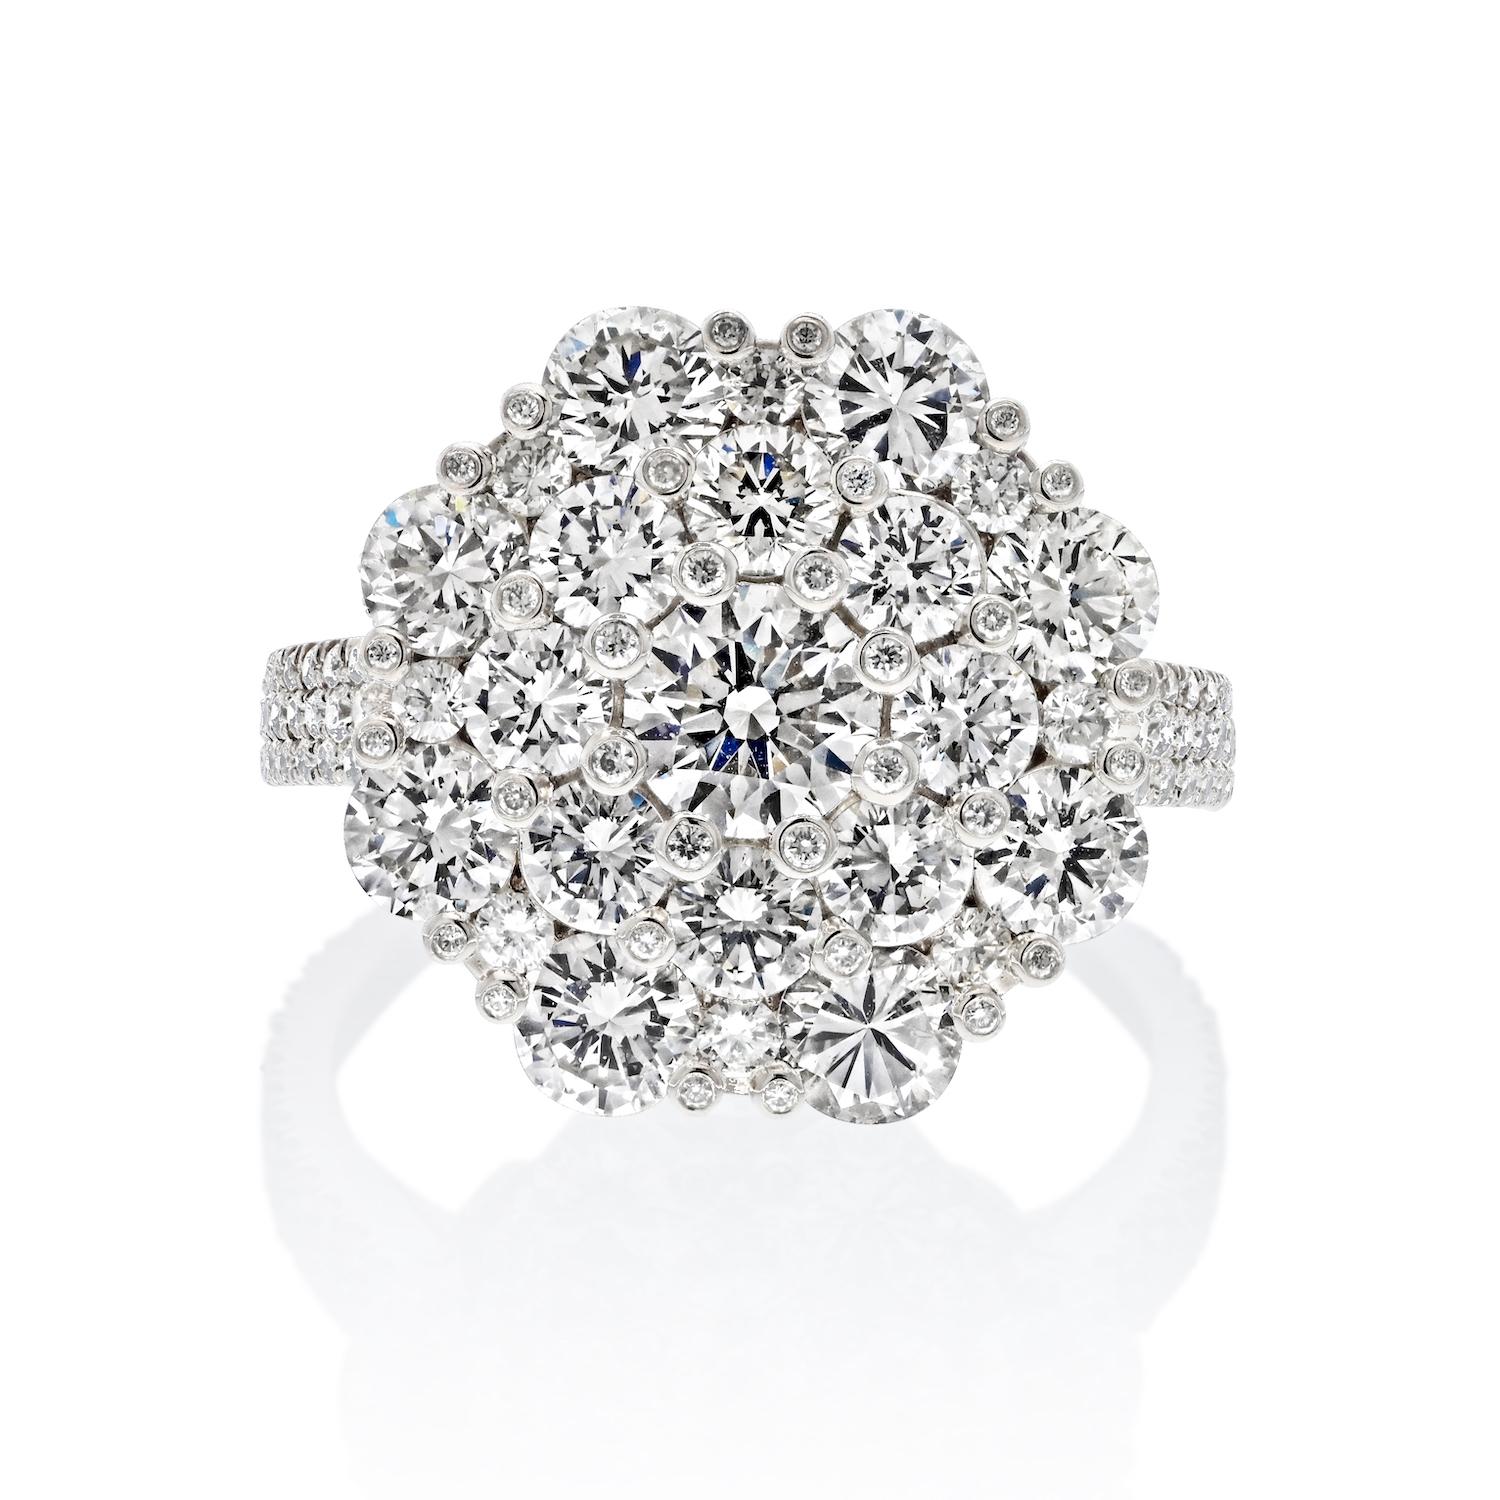 A Shimmering Masterpiece: The Platinum Diamond Cluster Flower Ring.

In the world of high-end jewelry, there are pieces that stand out not only for their sheer beauty but also for the extraordinary craftsmanship behind them. This handcrafted